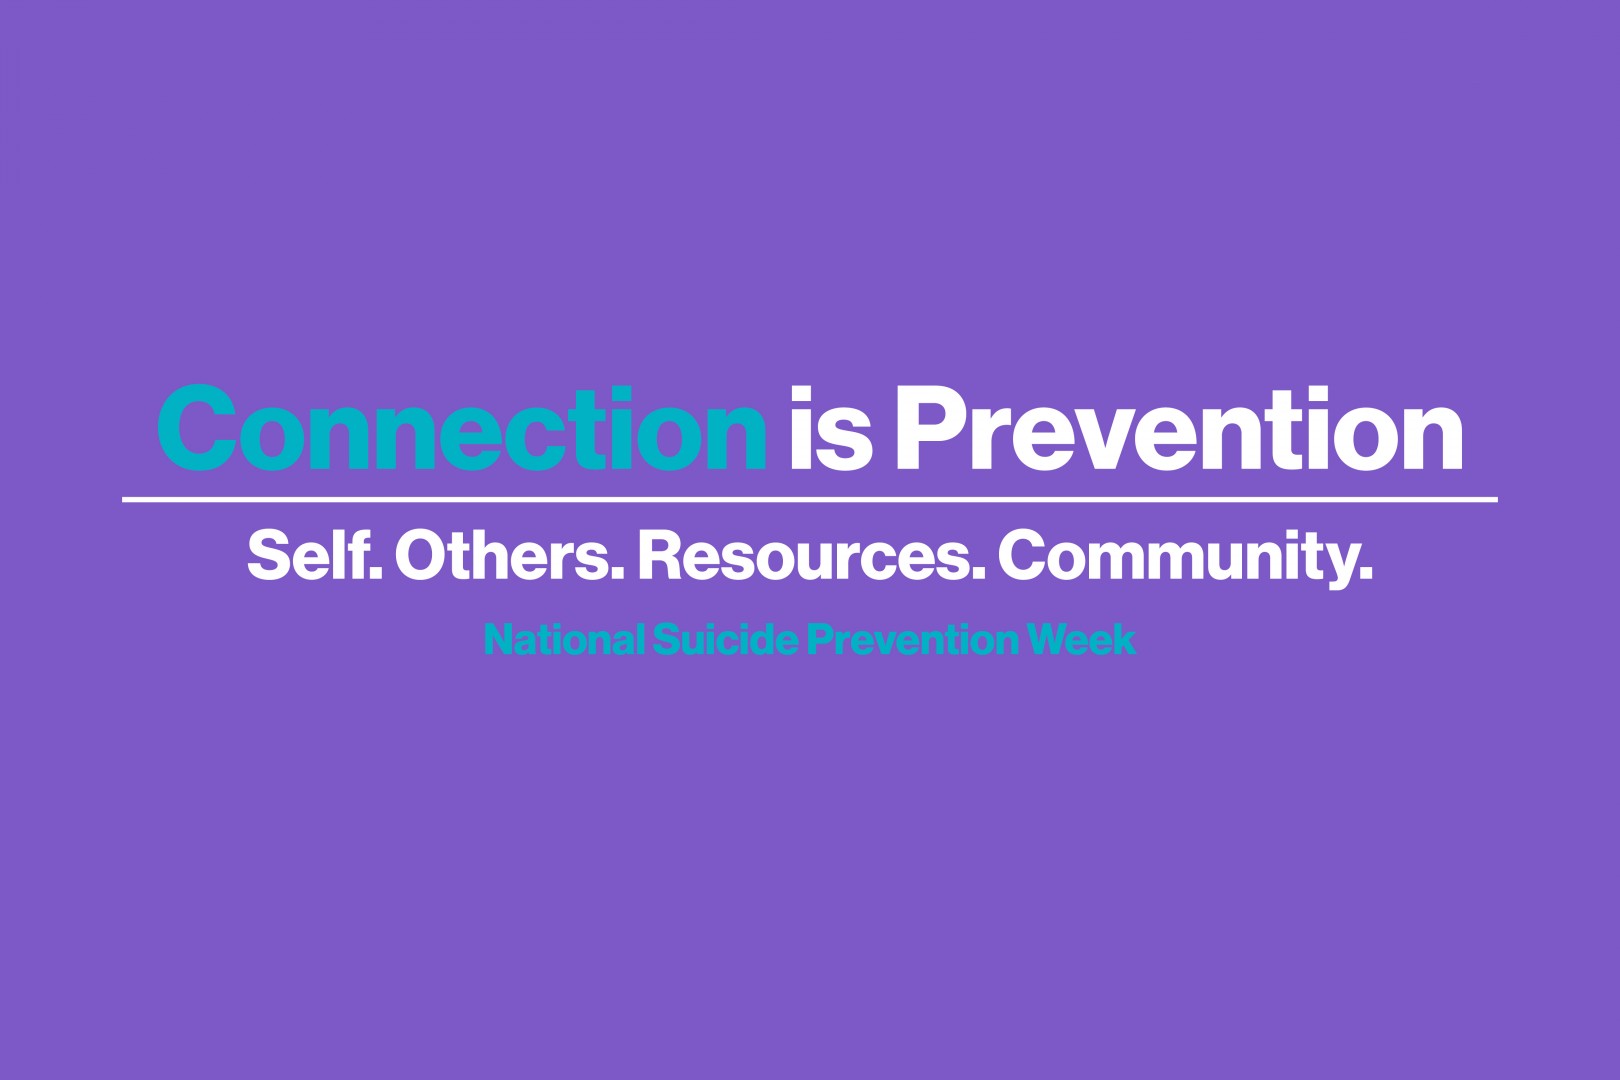 Connection is Prevention: Self, Each Other, Resources, Community